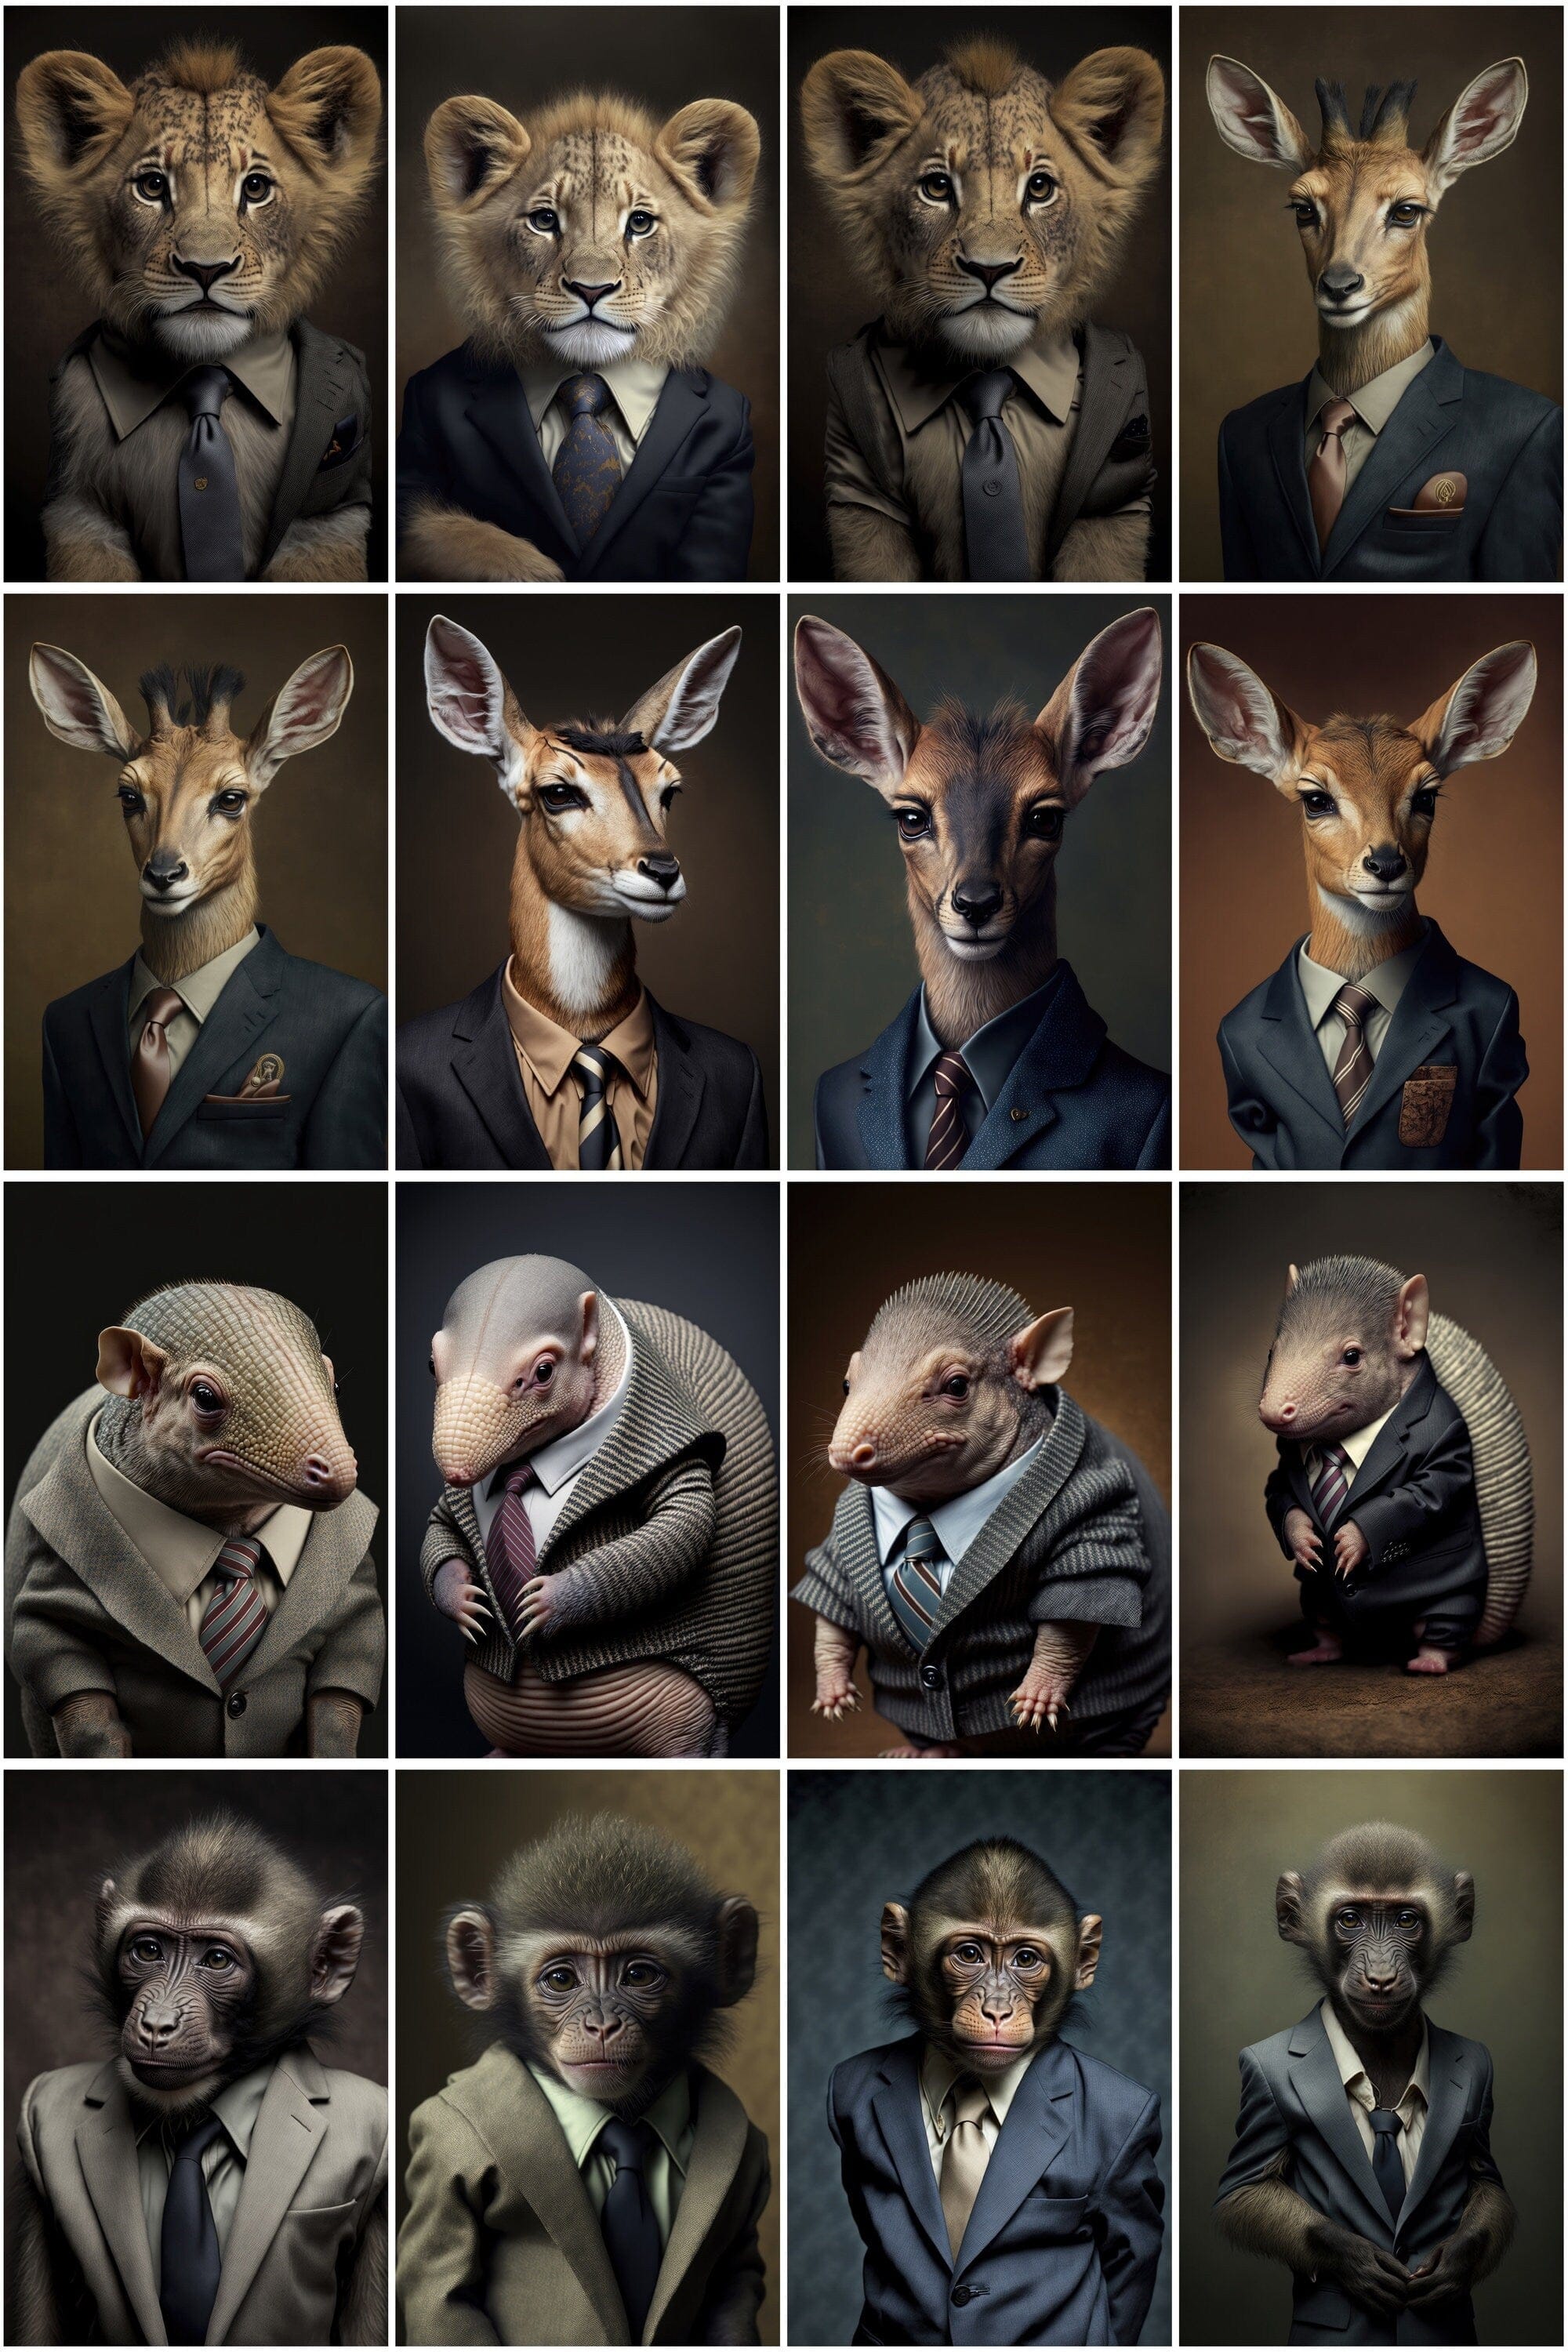 Adorable Baby Animals in Business Suits - 390 Whimsical Illustrations with Funny Designs and Charming Drawings, Perfect for Clipart and More Digital Download Sumobundle